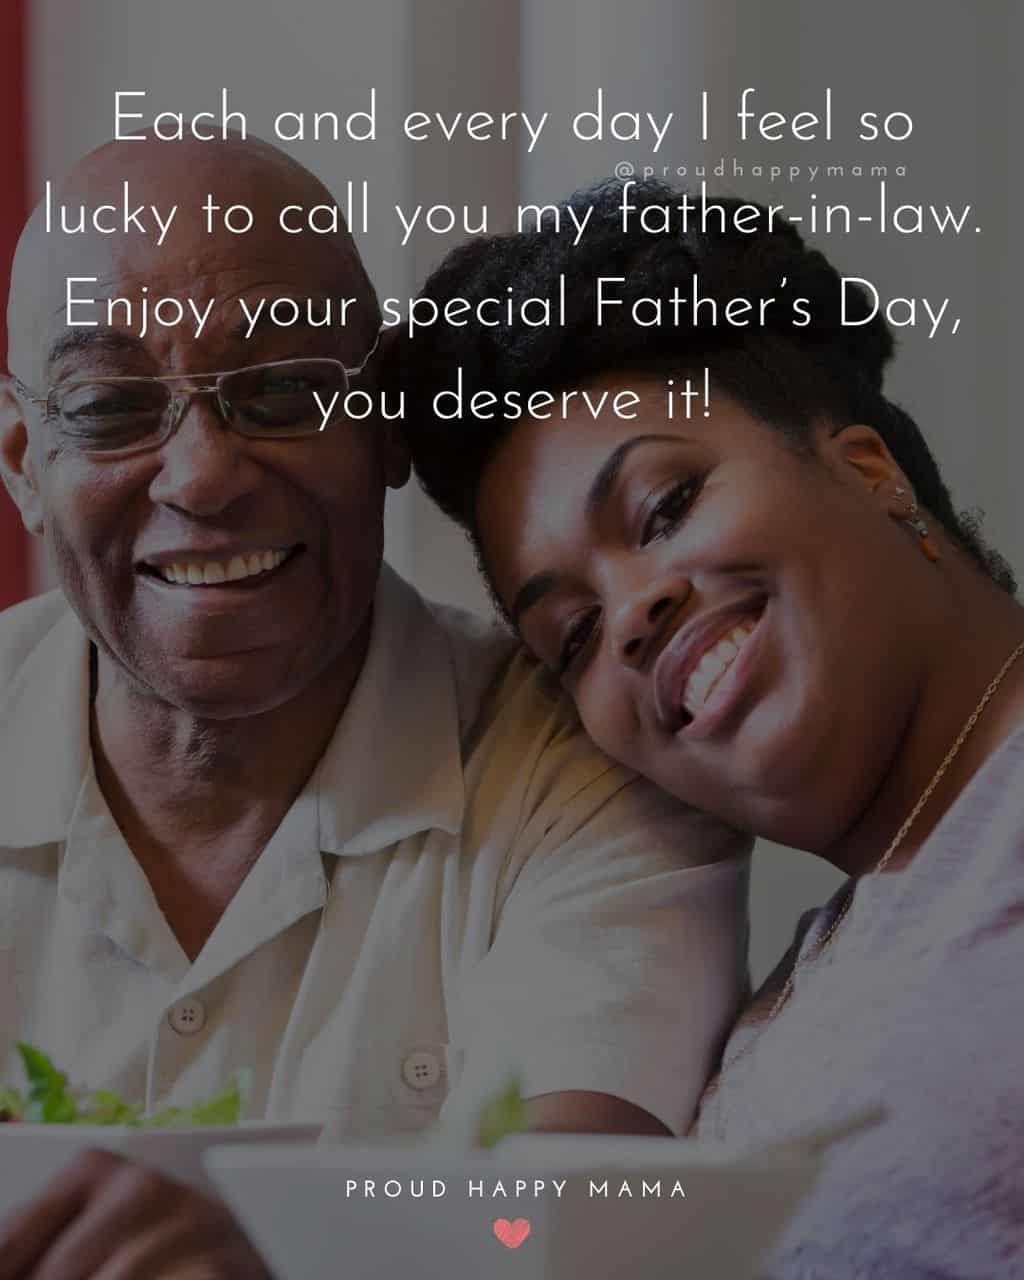 Happy Fathers Day Quotes For Father In Law - Each and every day I feel so lucky to call you my father in law. Enjoy your special